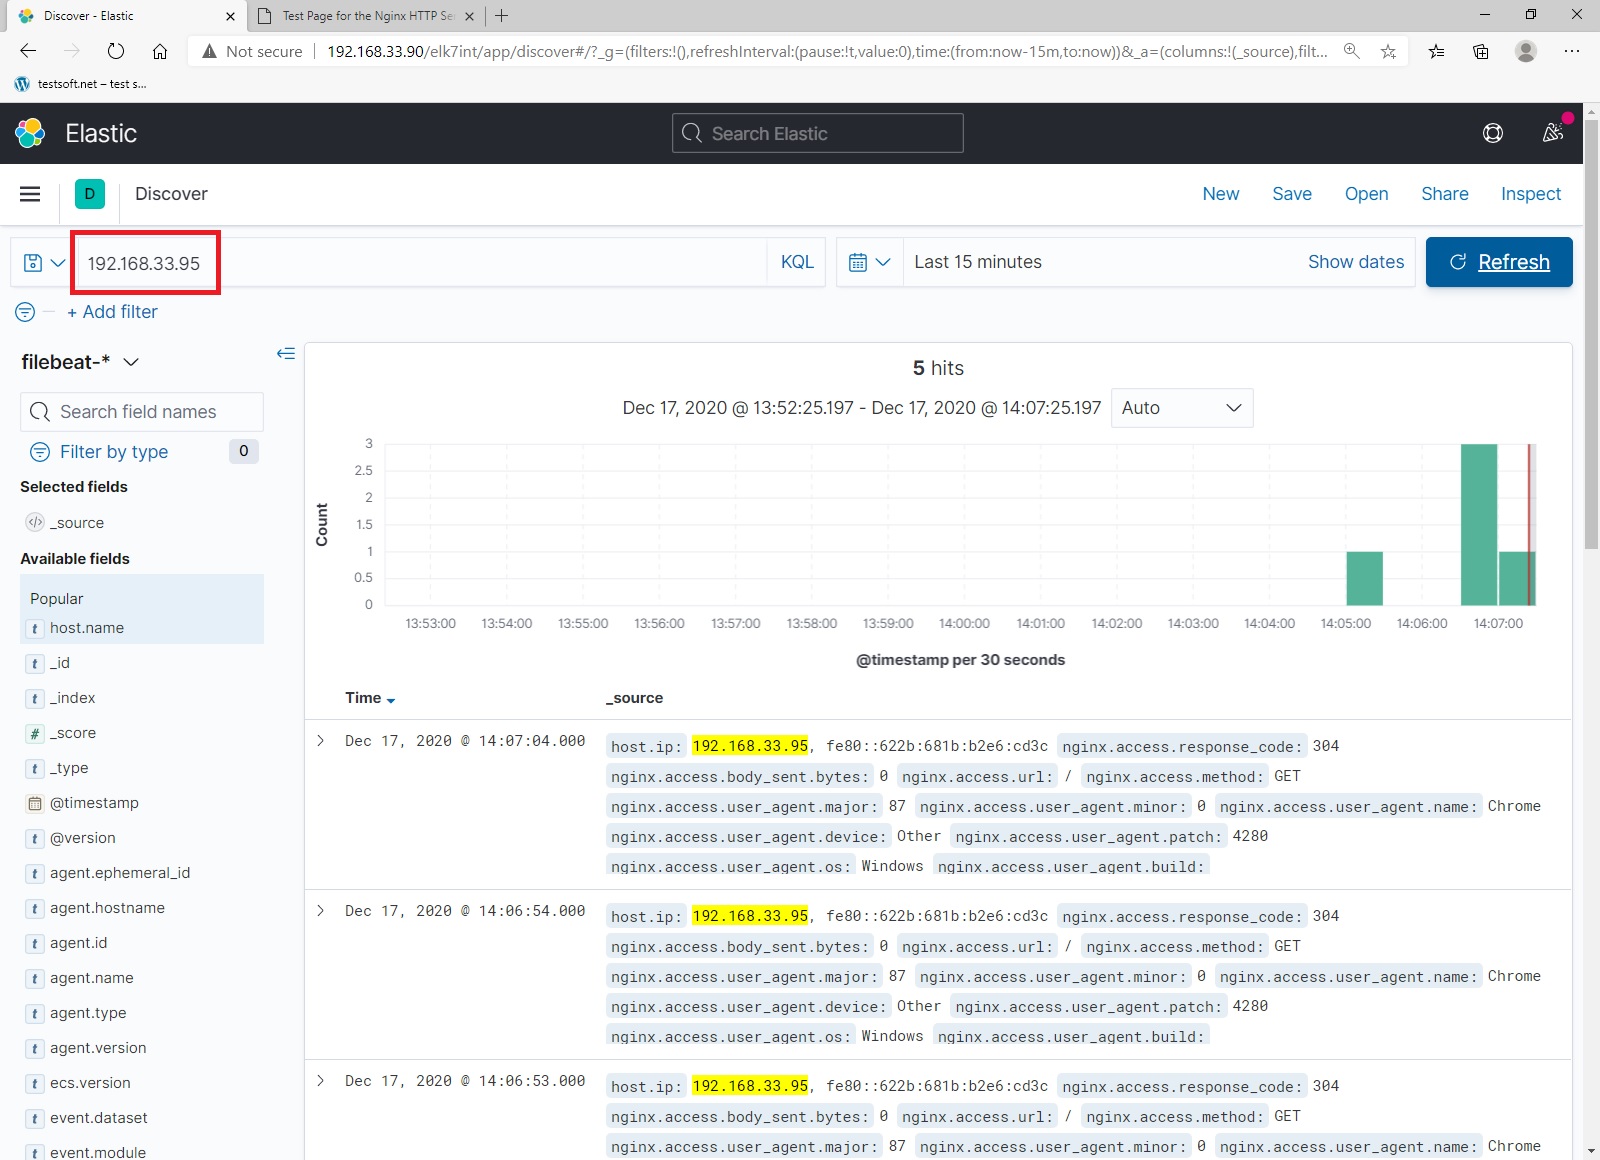 Elasticsearch remote log view form 192.168.33.95. Picture 13.